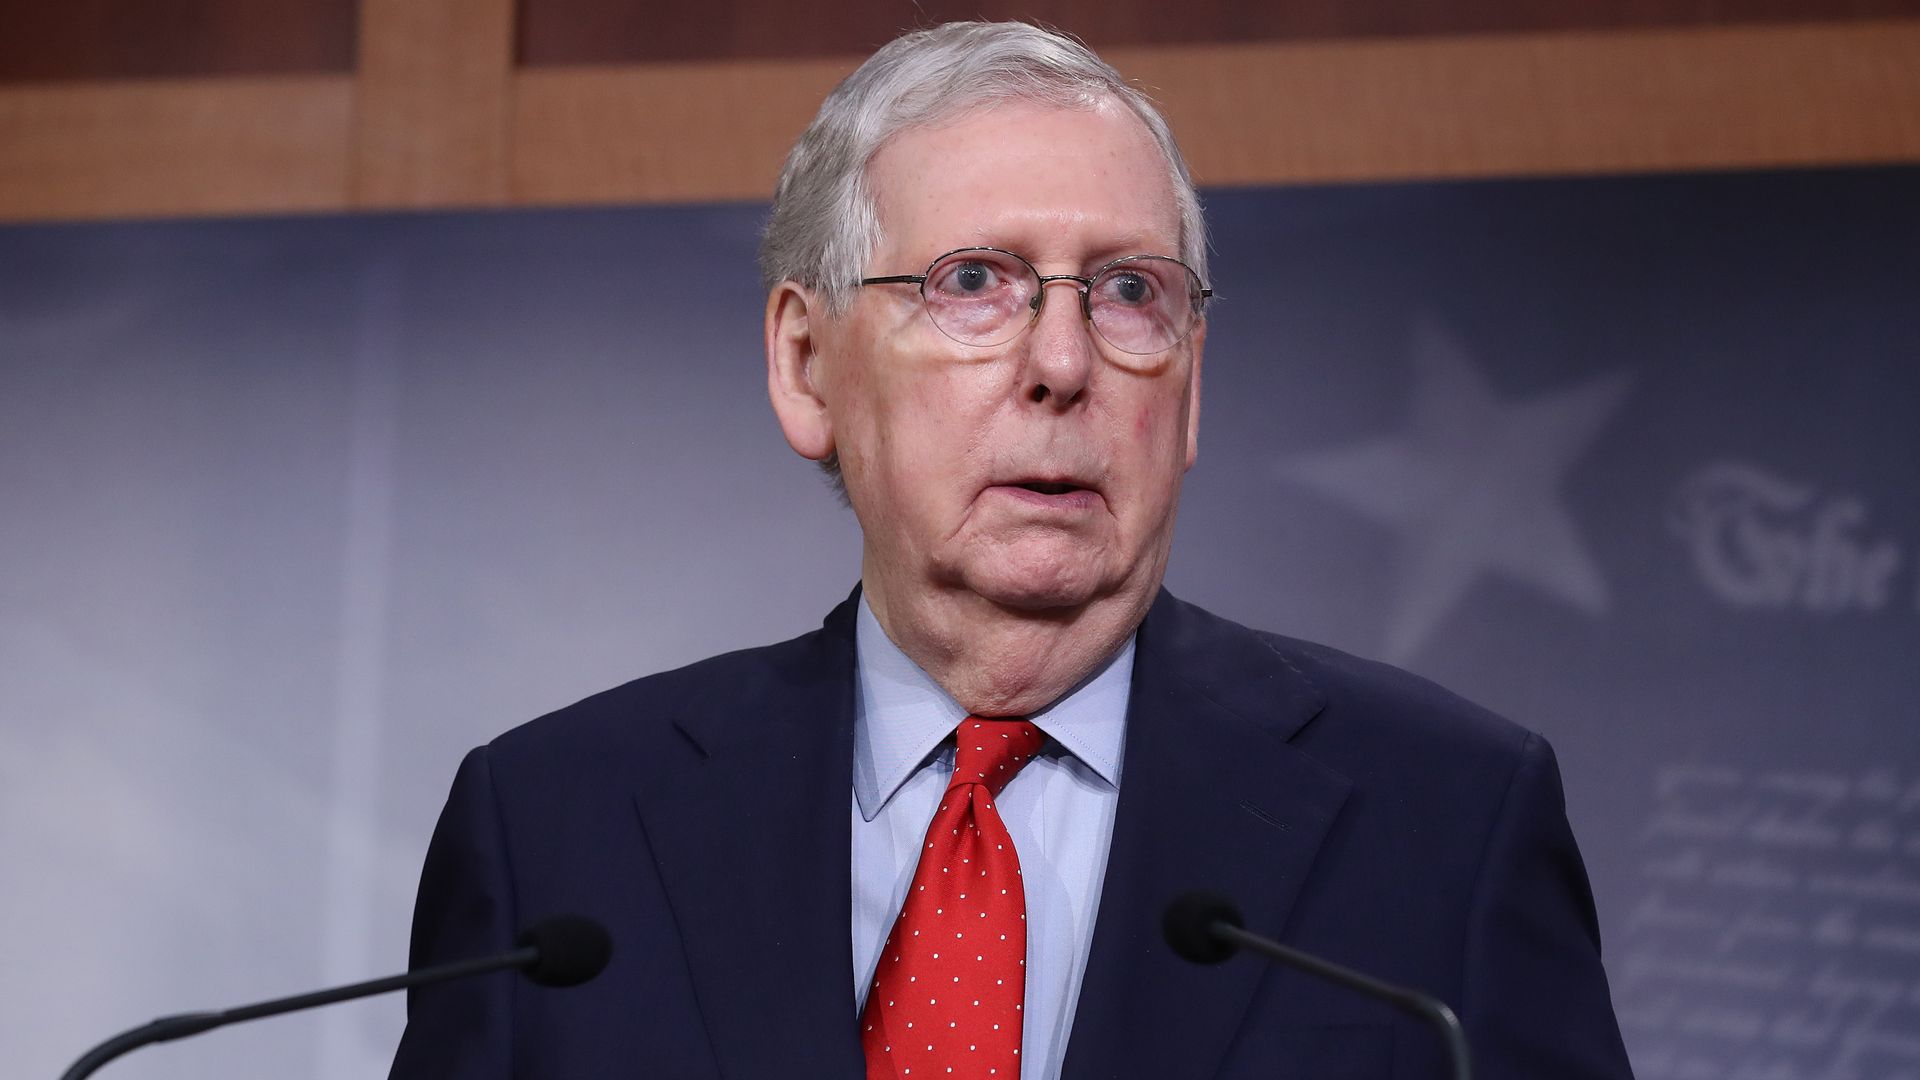 Mitch McConnell looks to the left while standing at the podium